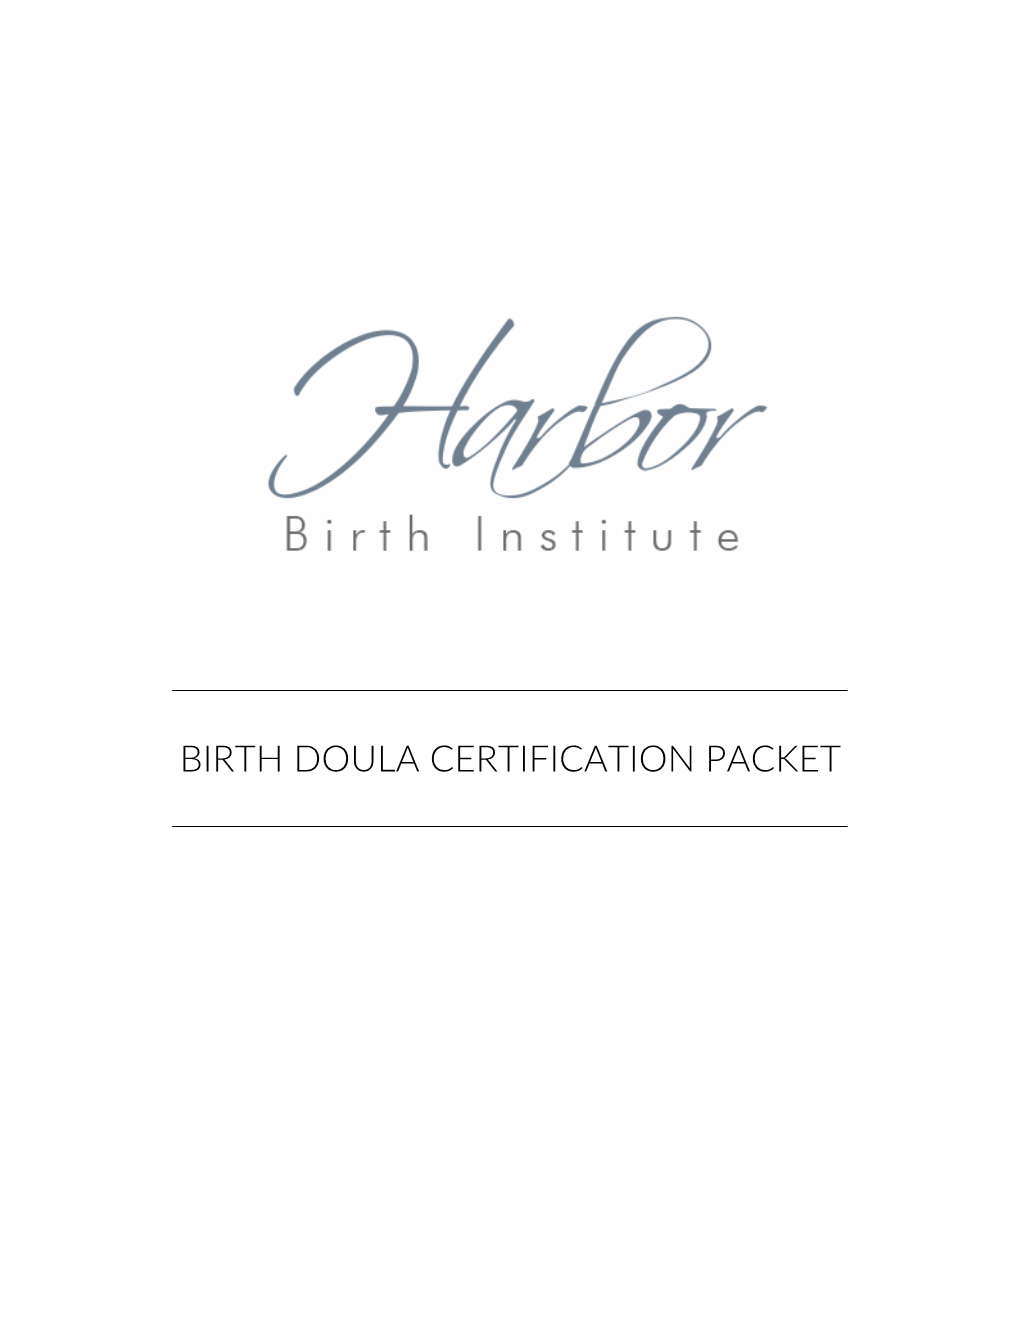 Birth Doula Certification Packet